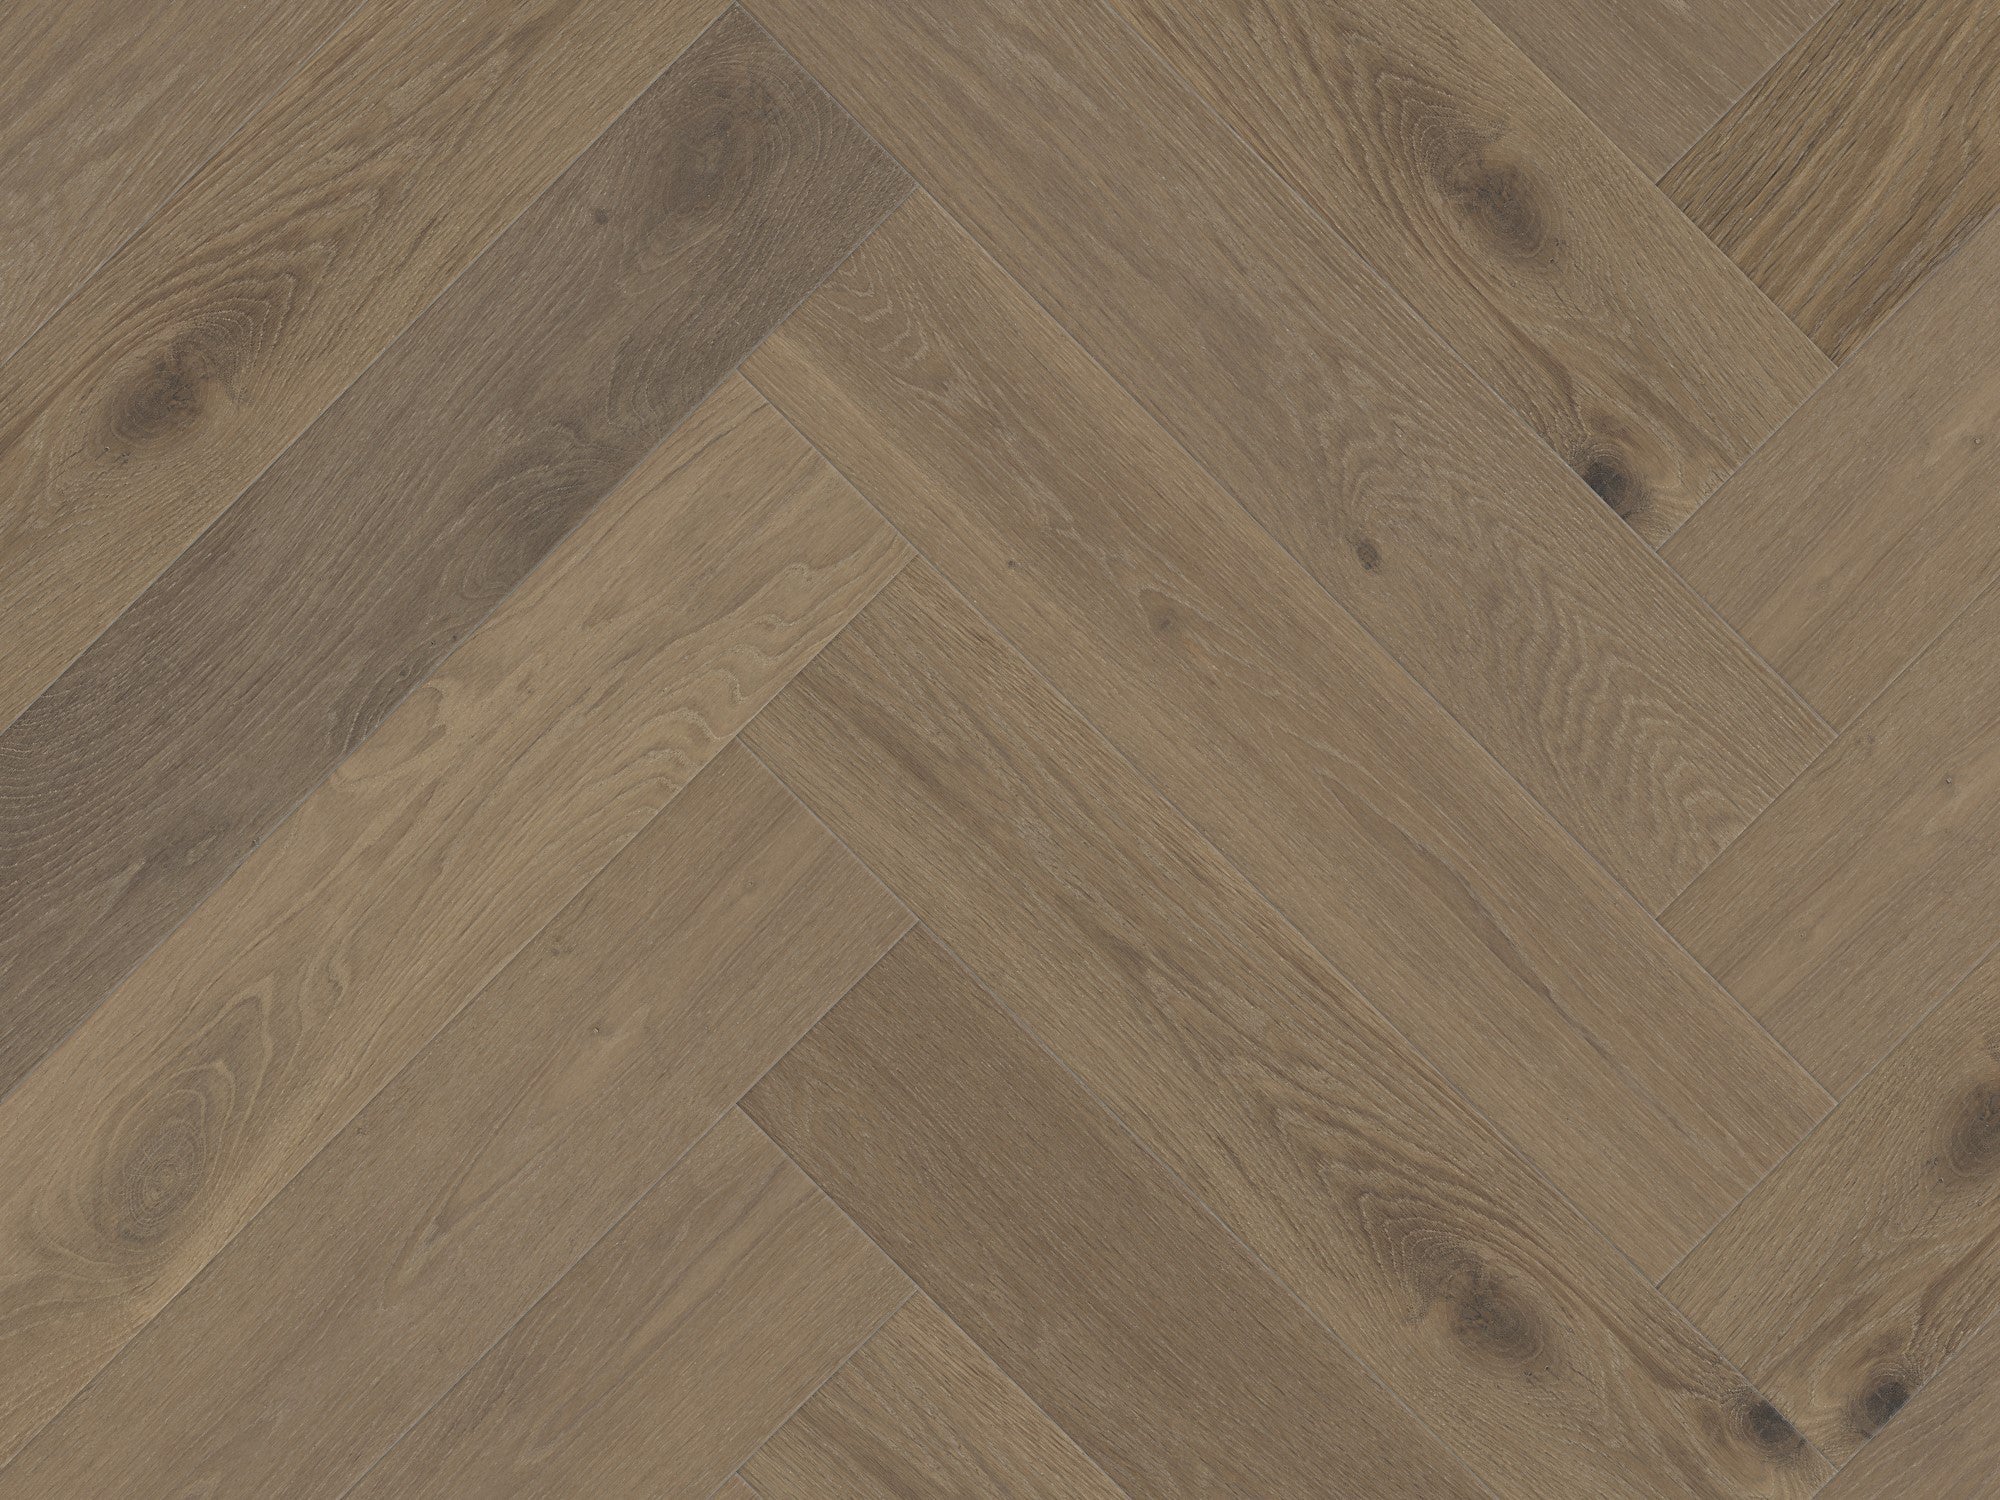 duchateau signature terra chaparral herringbone european oak engineered hardnatural wood floor uv lacquer finish for interior use distributed by surface group international